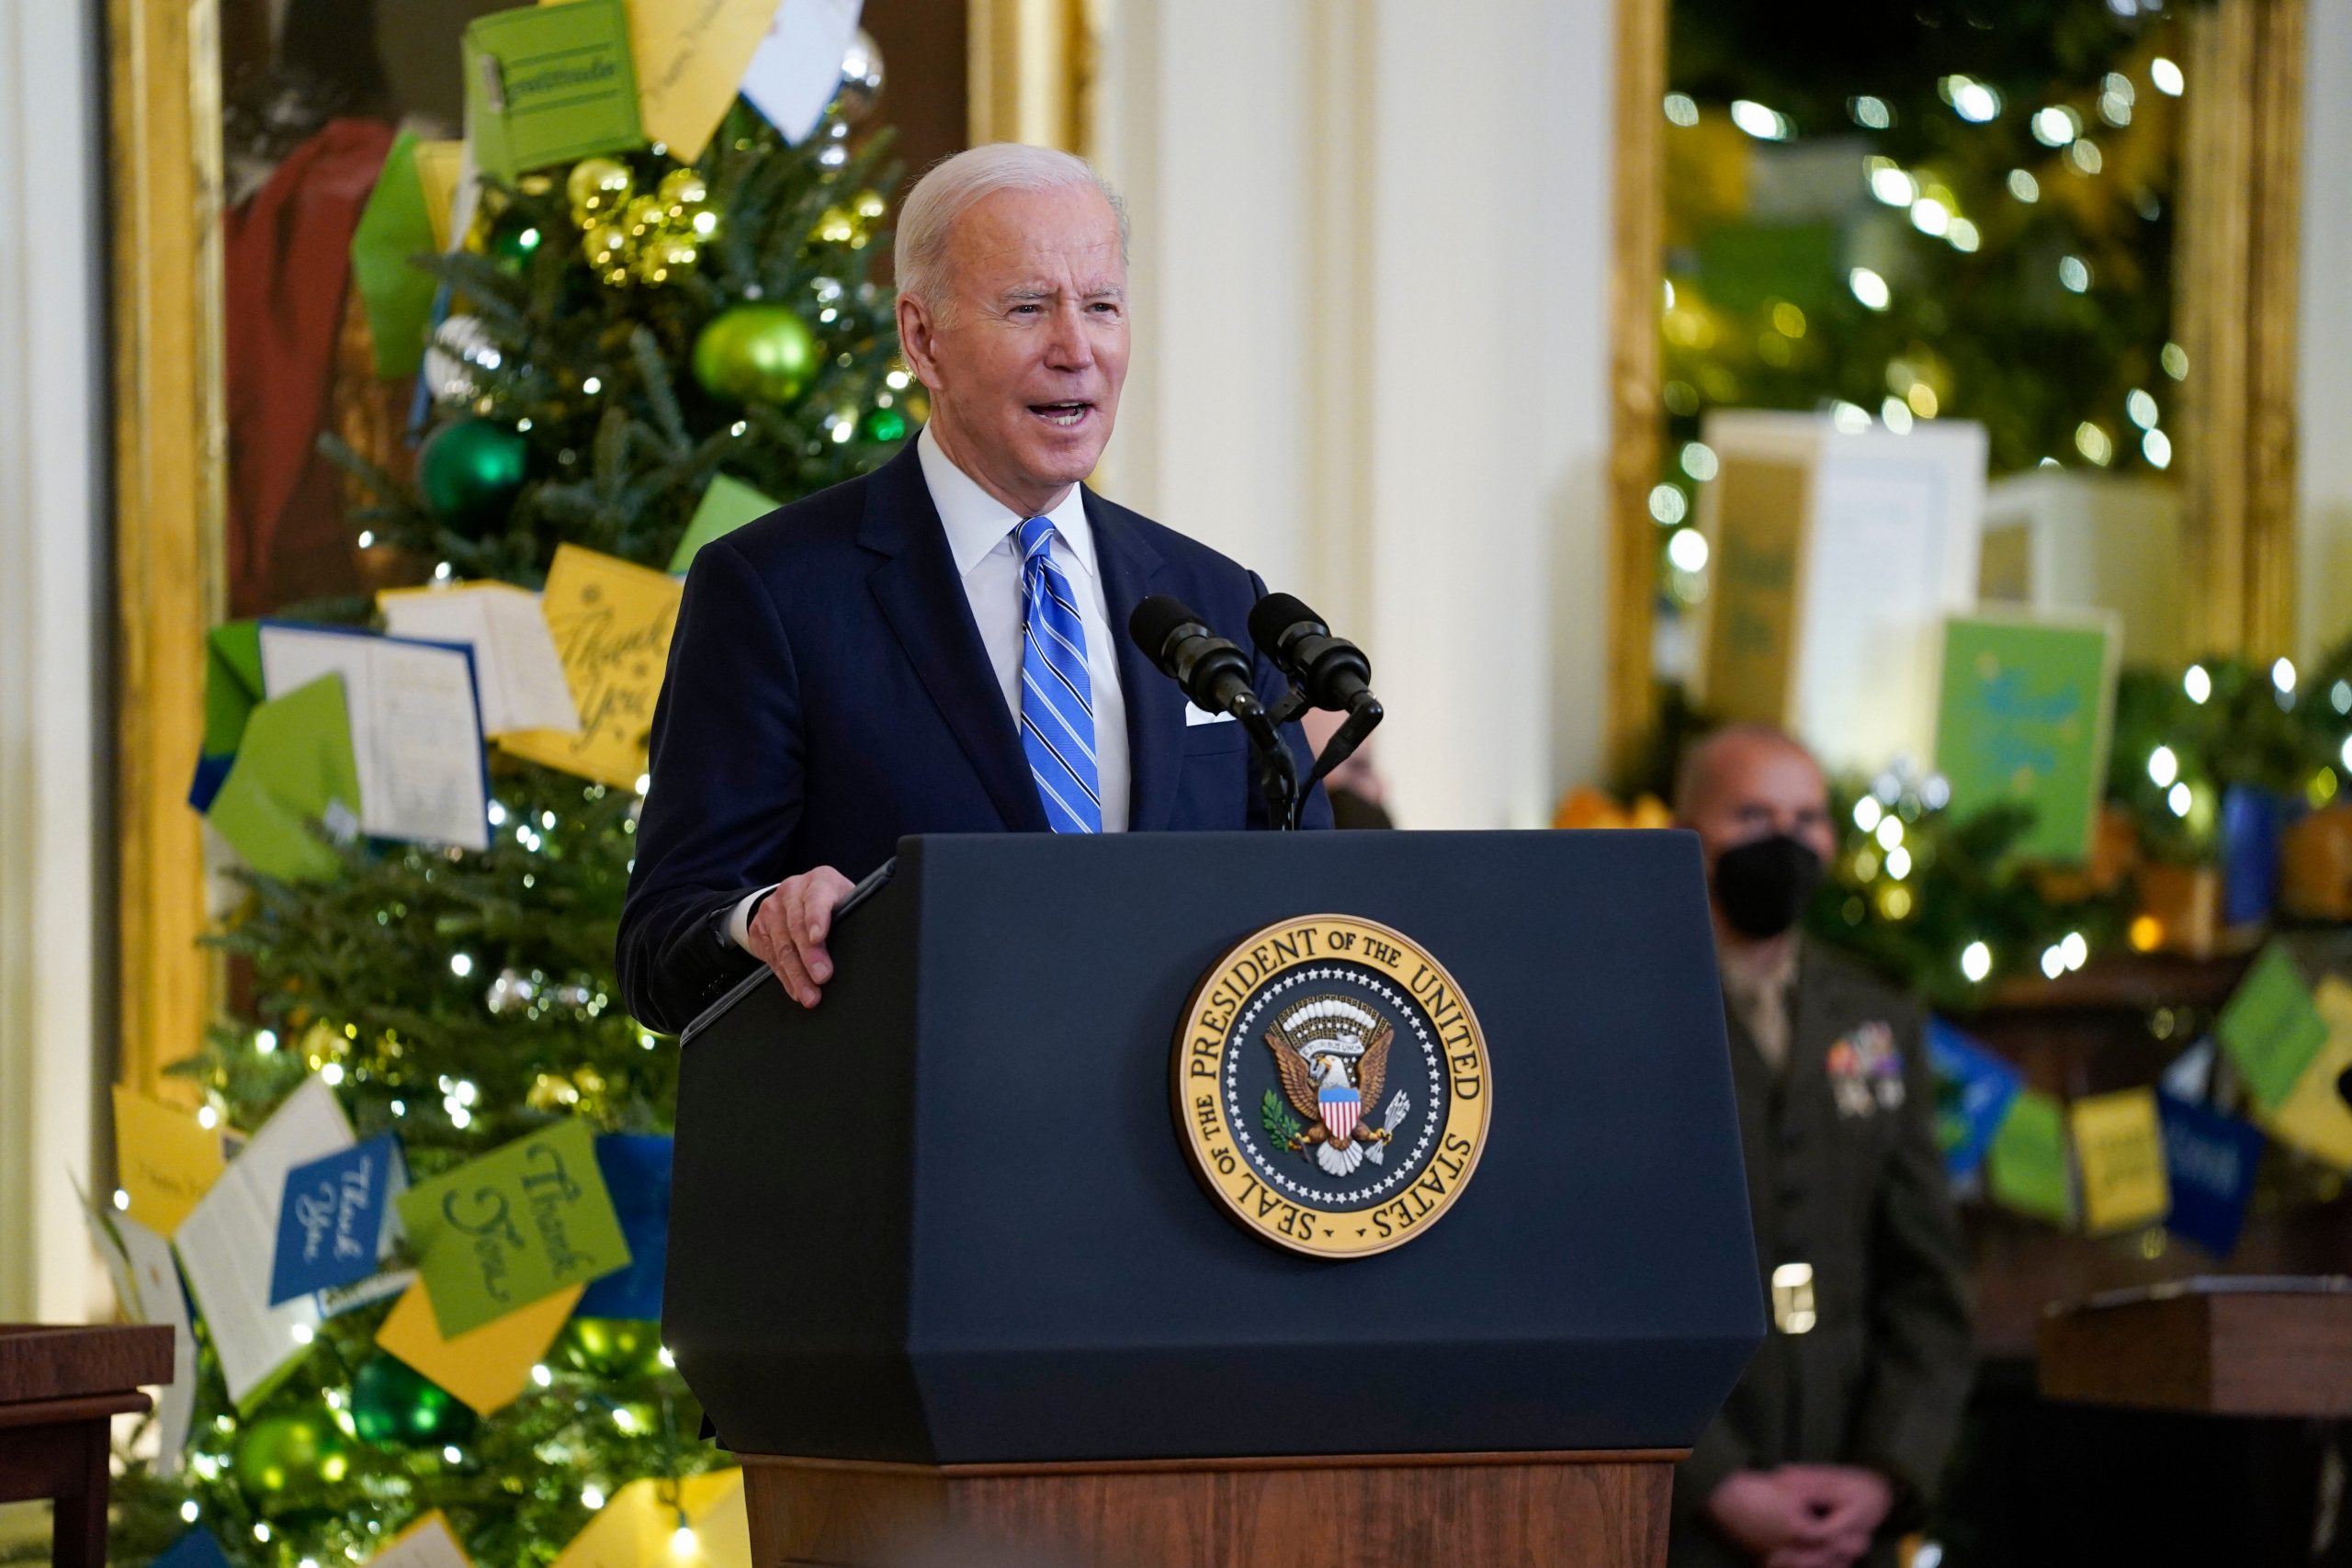 Joe Biden and Dems scramble to salvage social, climate package